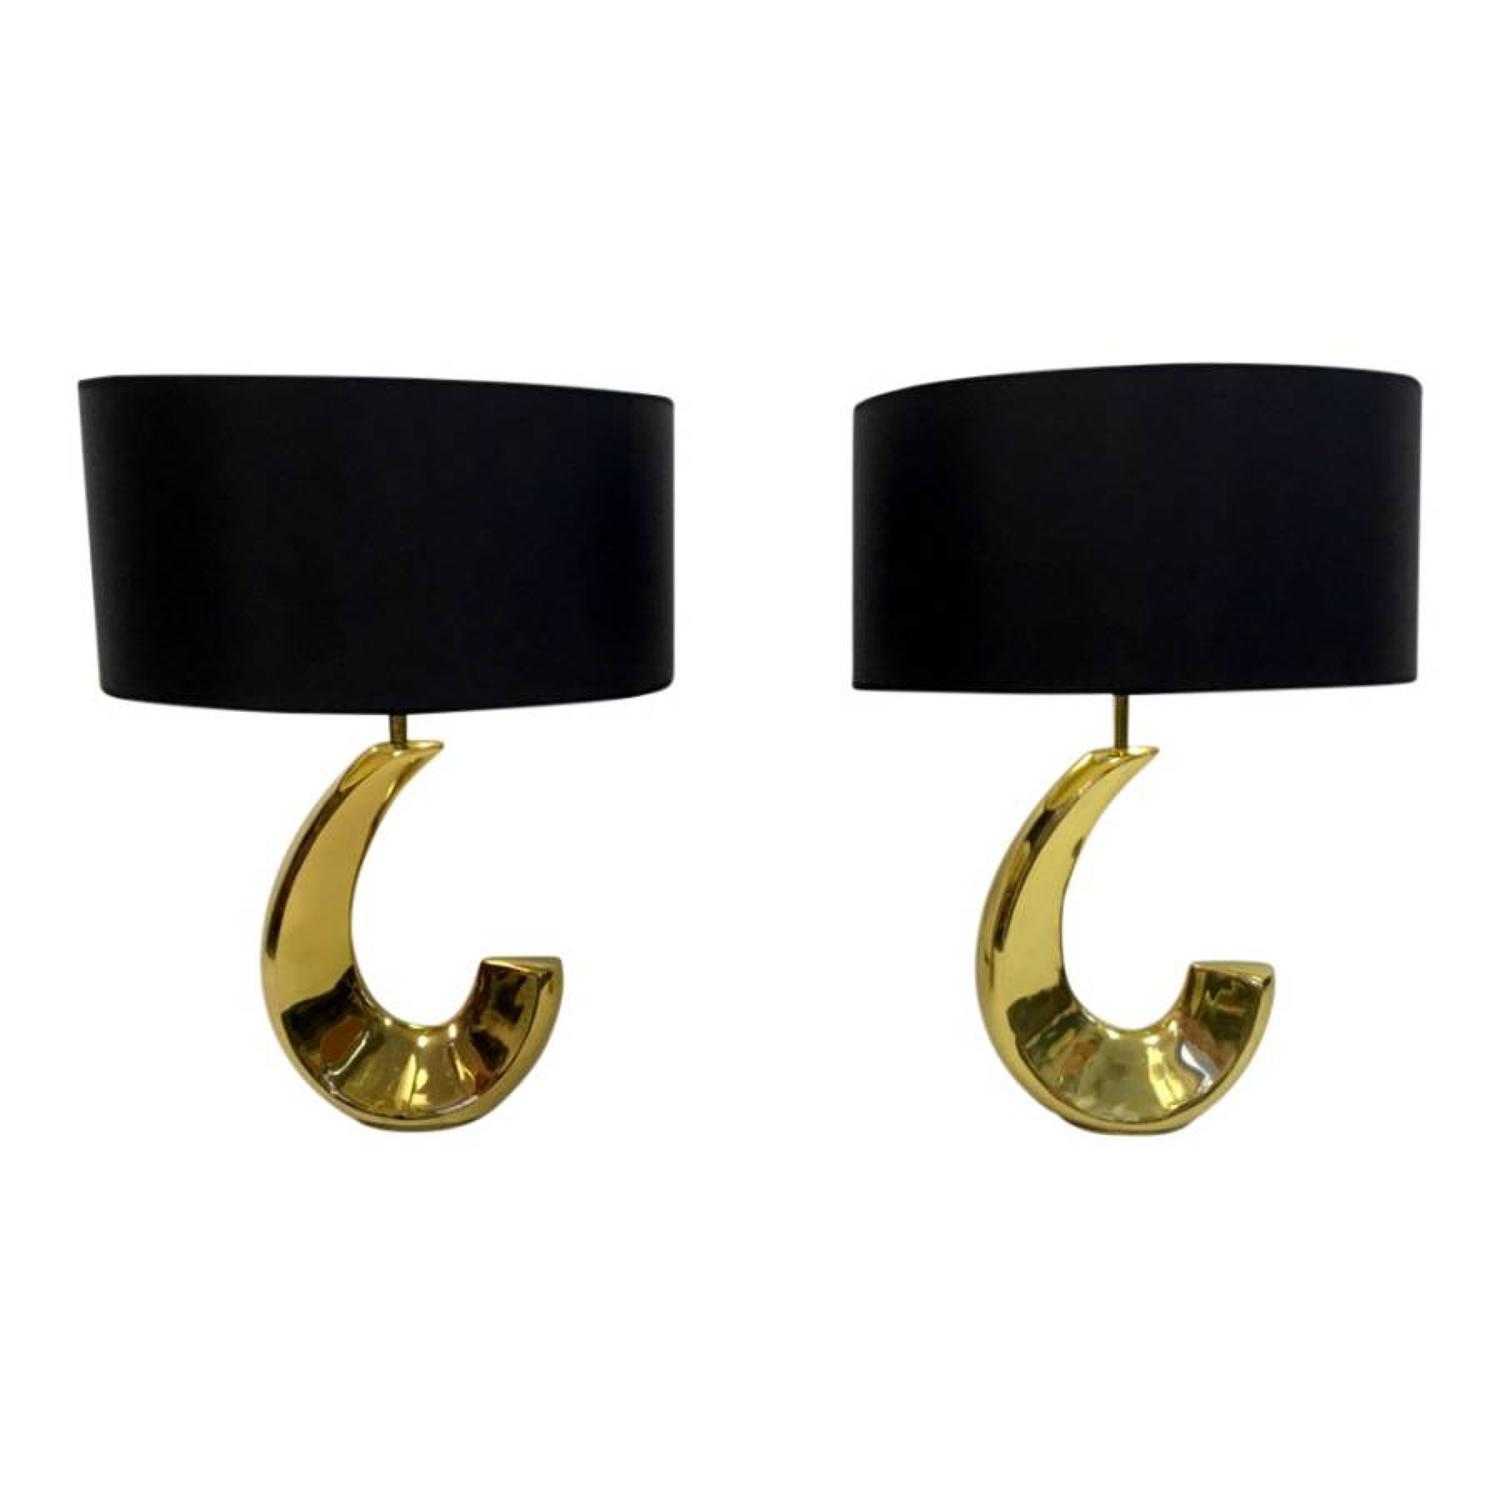 A pair of 1970s French brass lamps